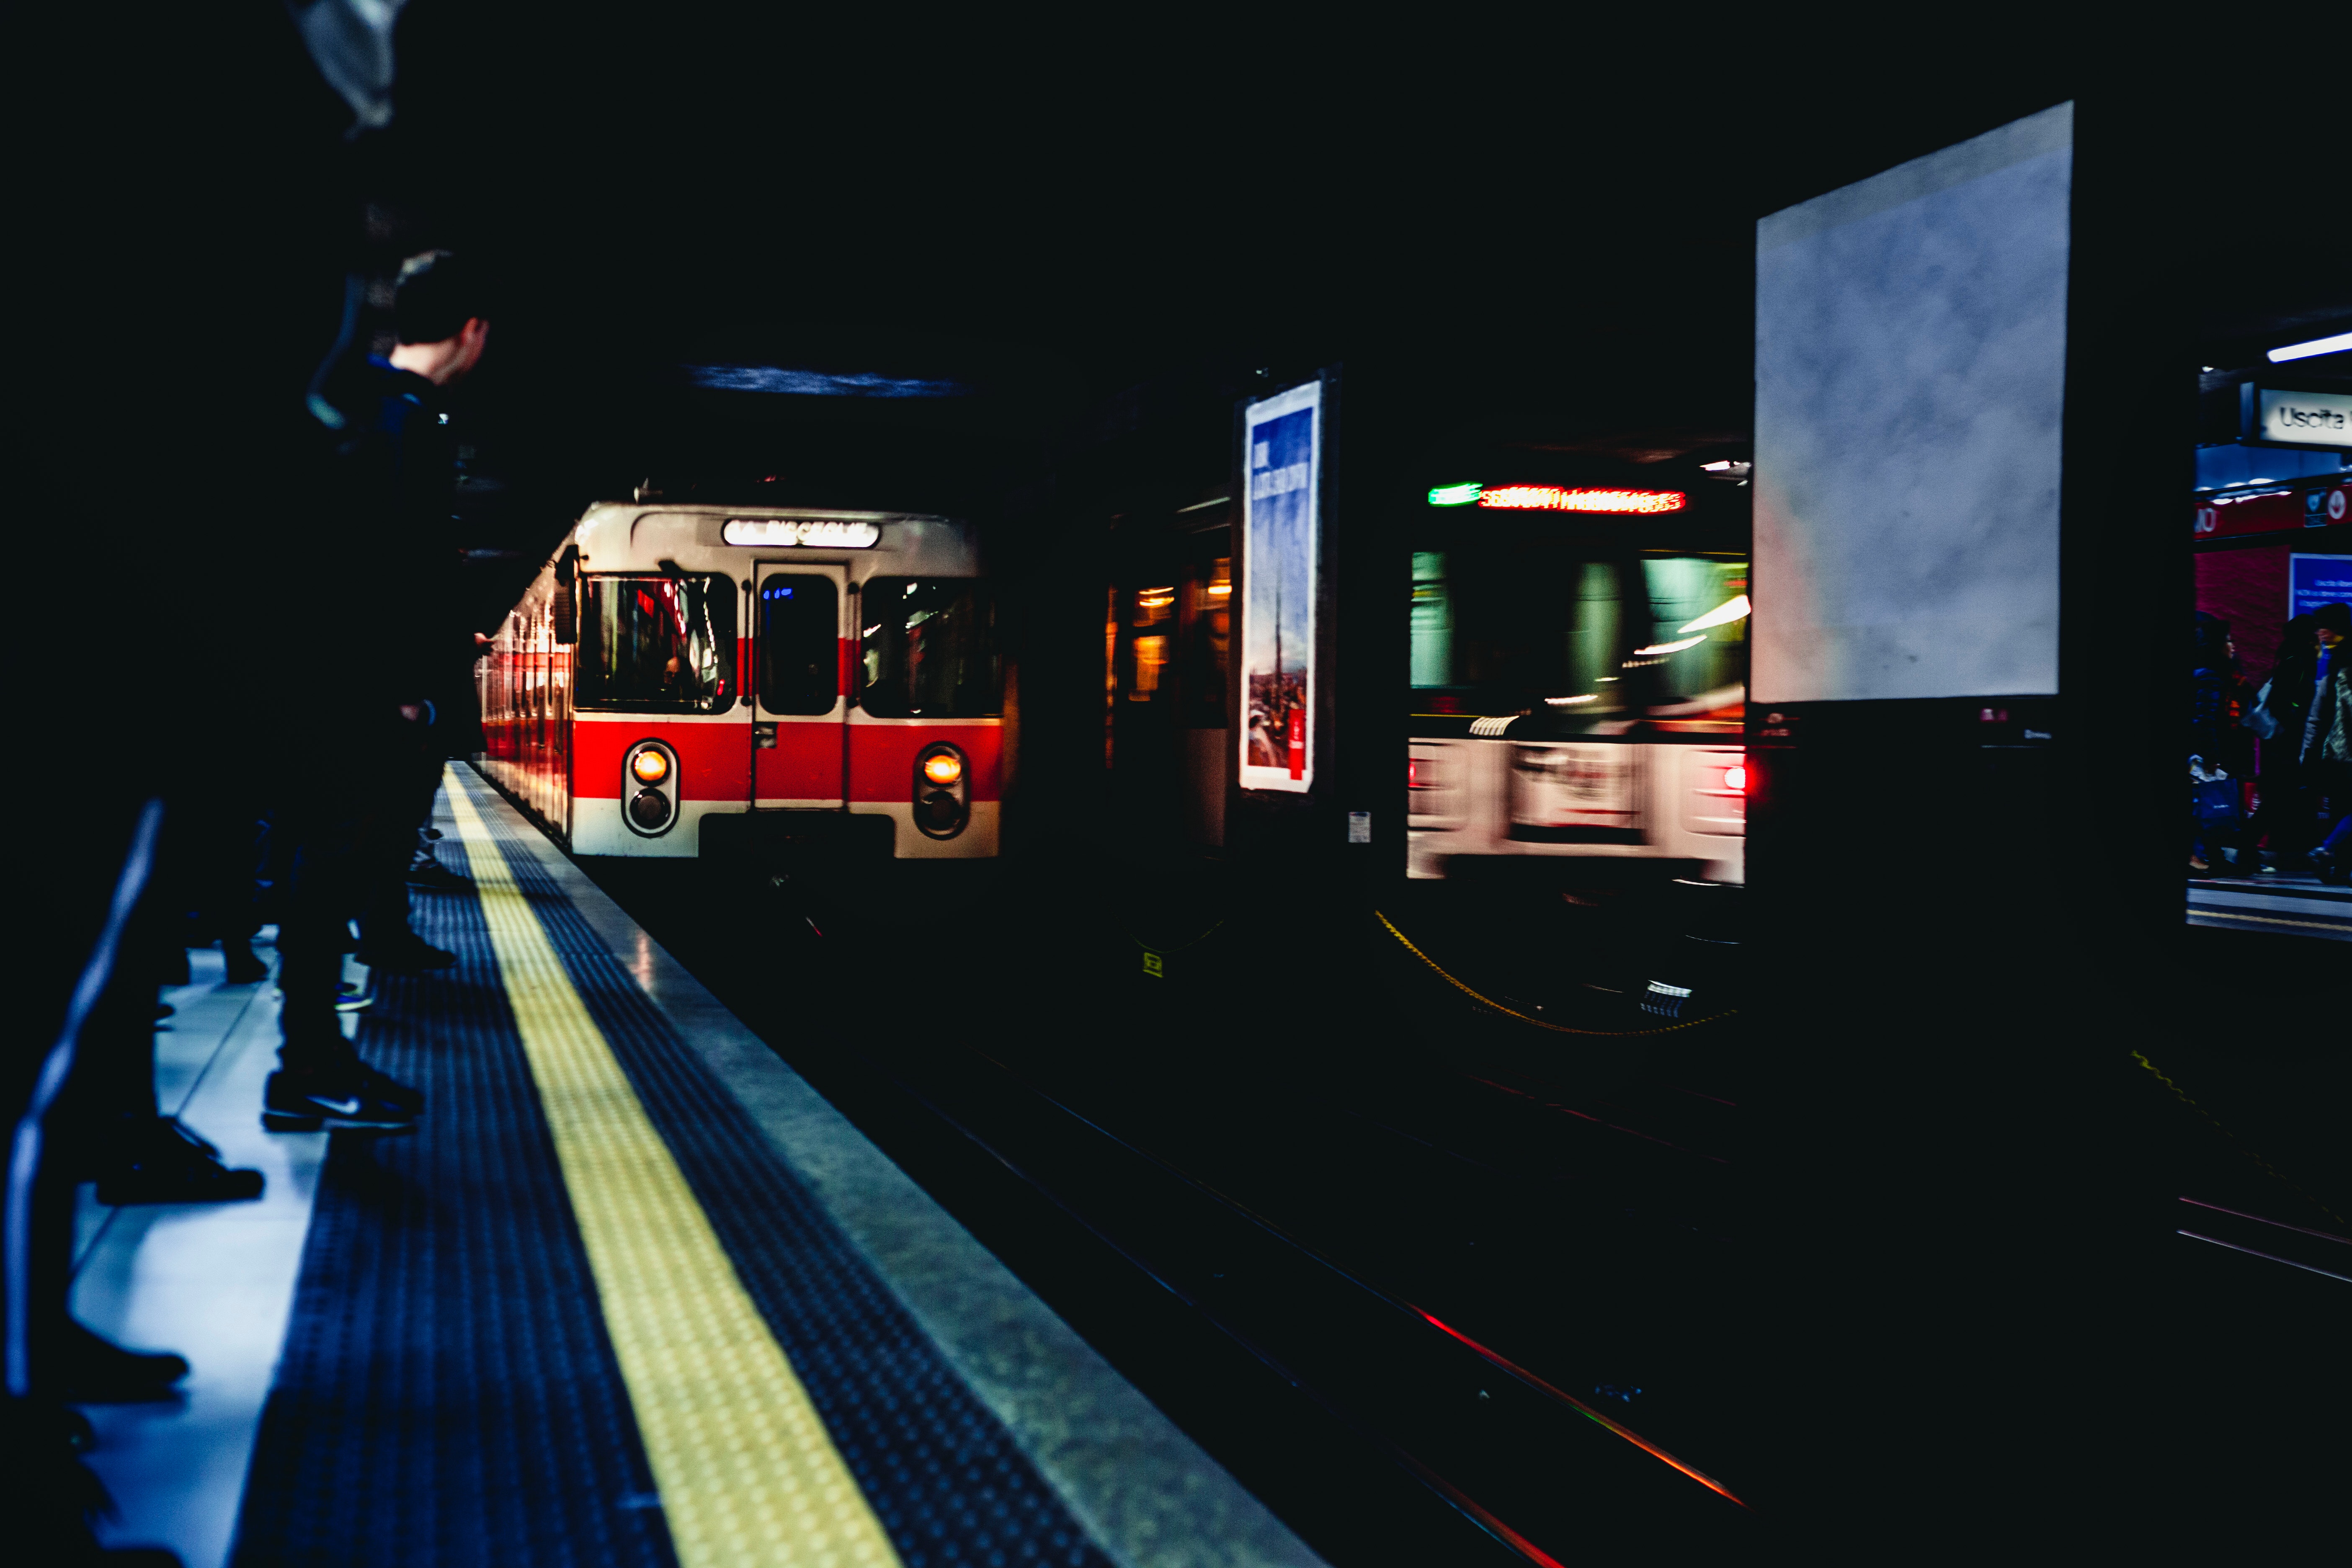 White and Red Train in Underground, Blur, People, Travel, Transportation system, HQ Photo